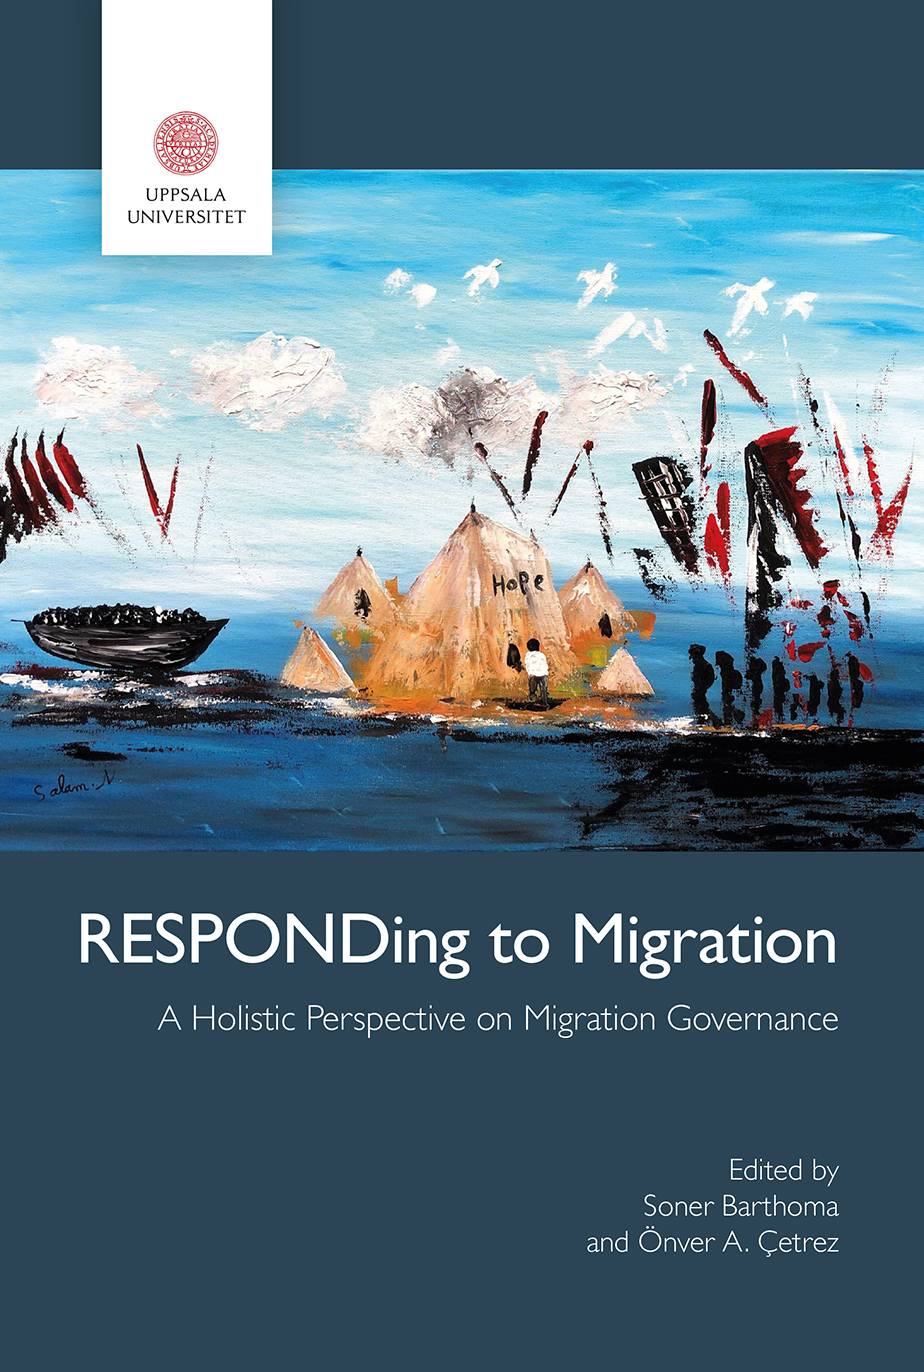 RESPONDing to Migration: A Holistic Perspective on Migration Governance